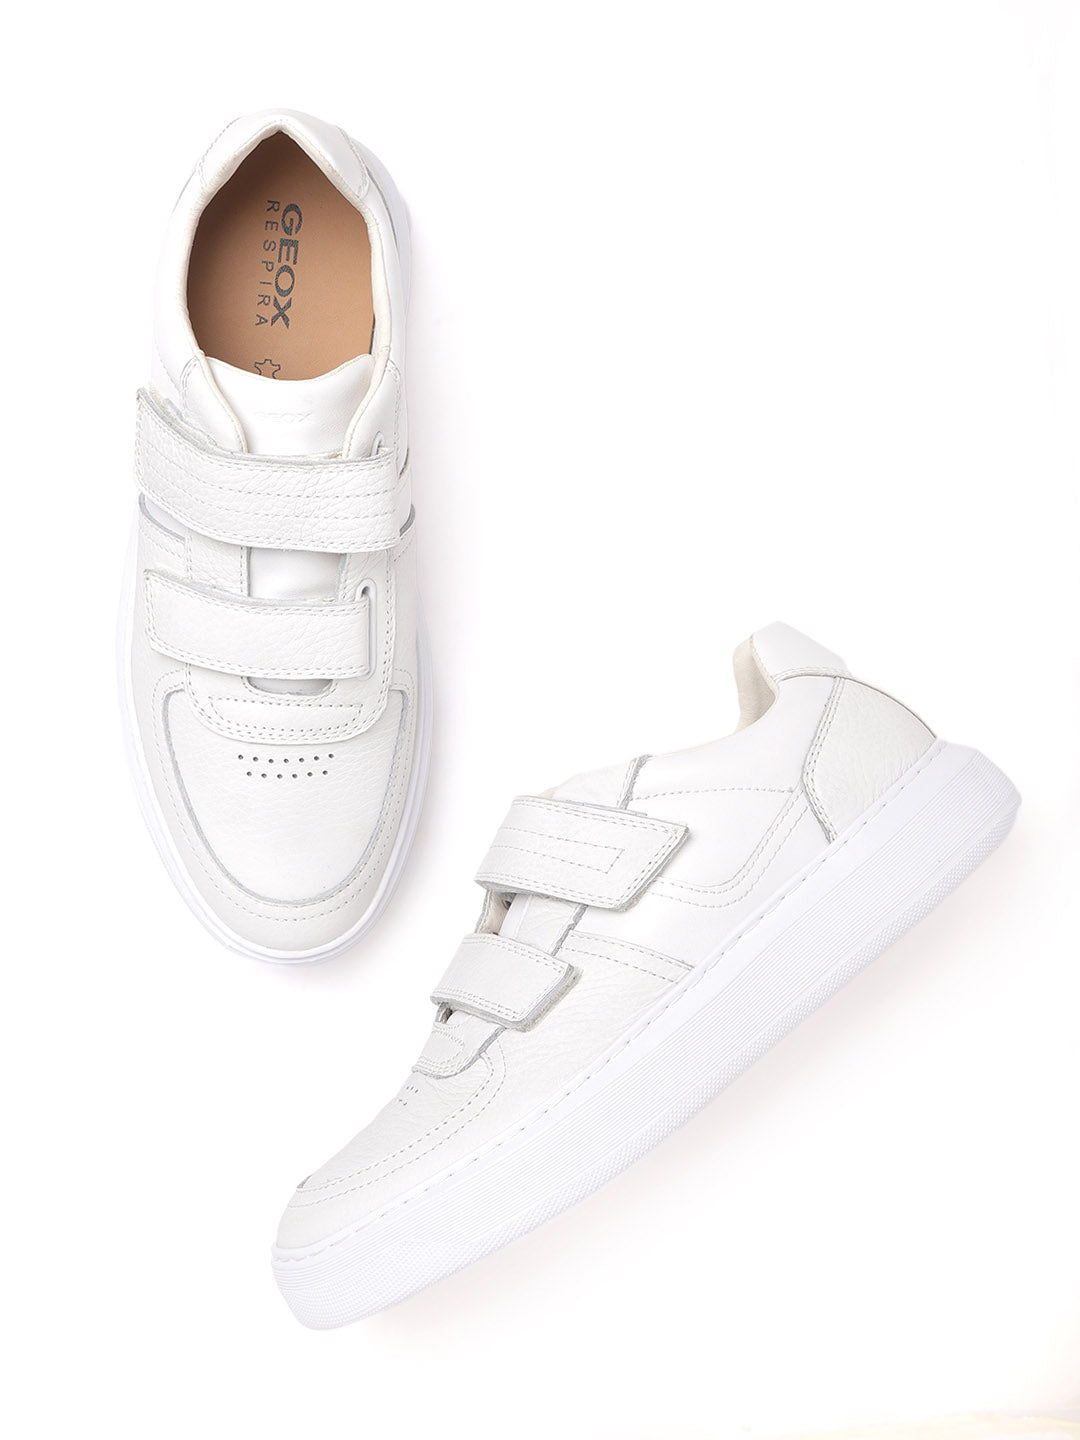 Buy Lonsdale Men White Sneakers - Casual Shoes for Men 2303612 | Myntra